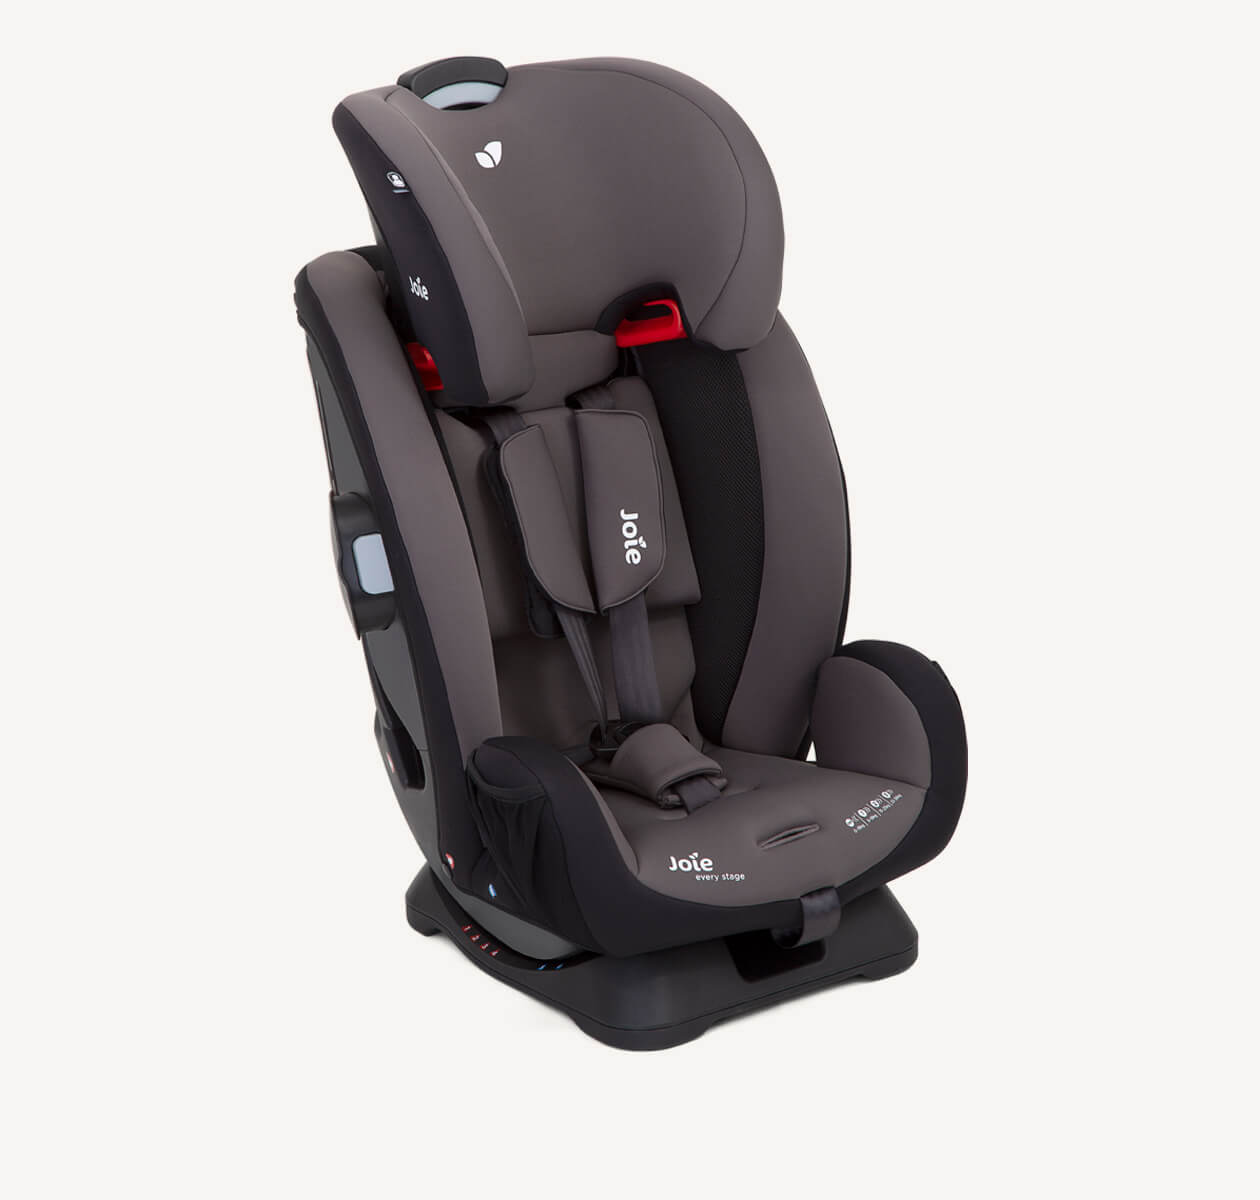  Joie Every Stage car seat with 5-point harness in black and gray, at an angle facing to the right.